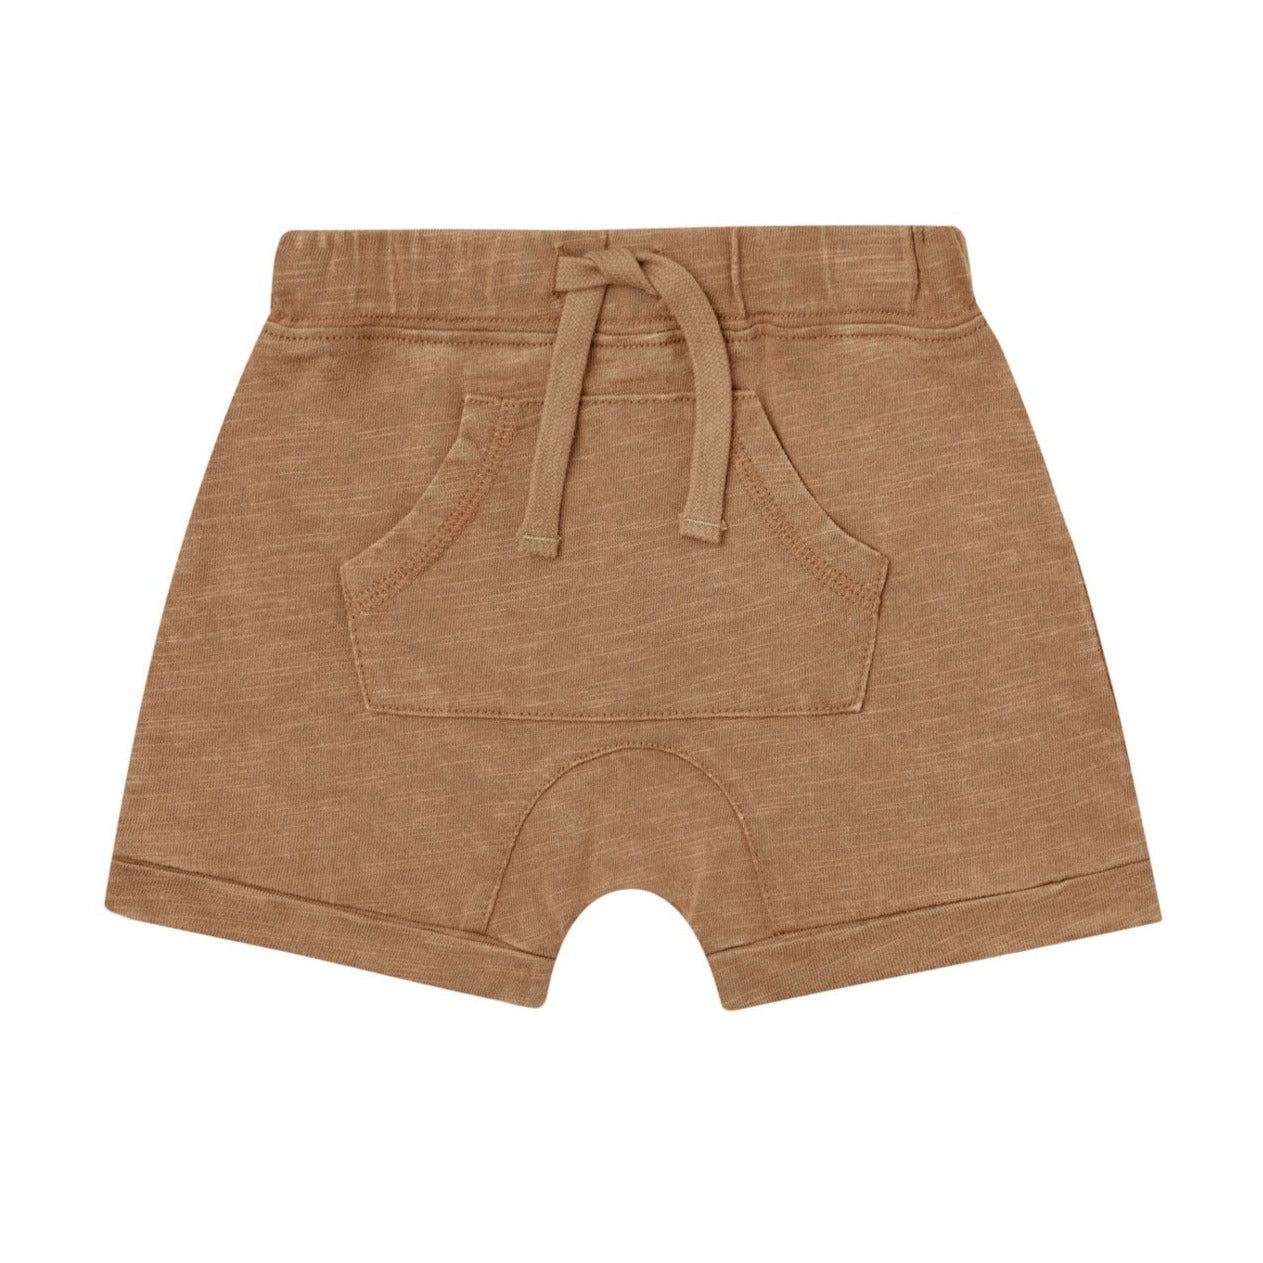 Rylee and Cru Front Pouch Short - Camel